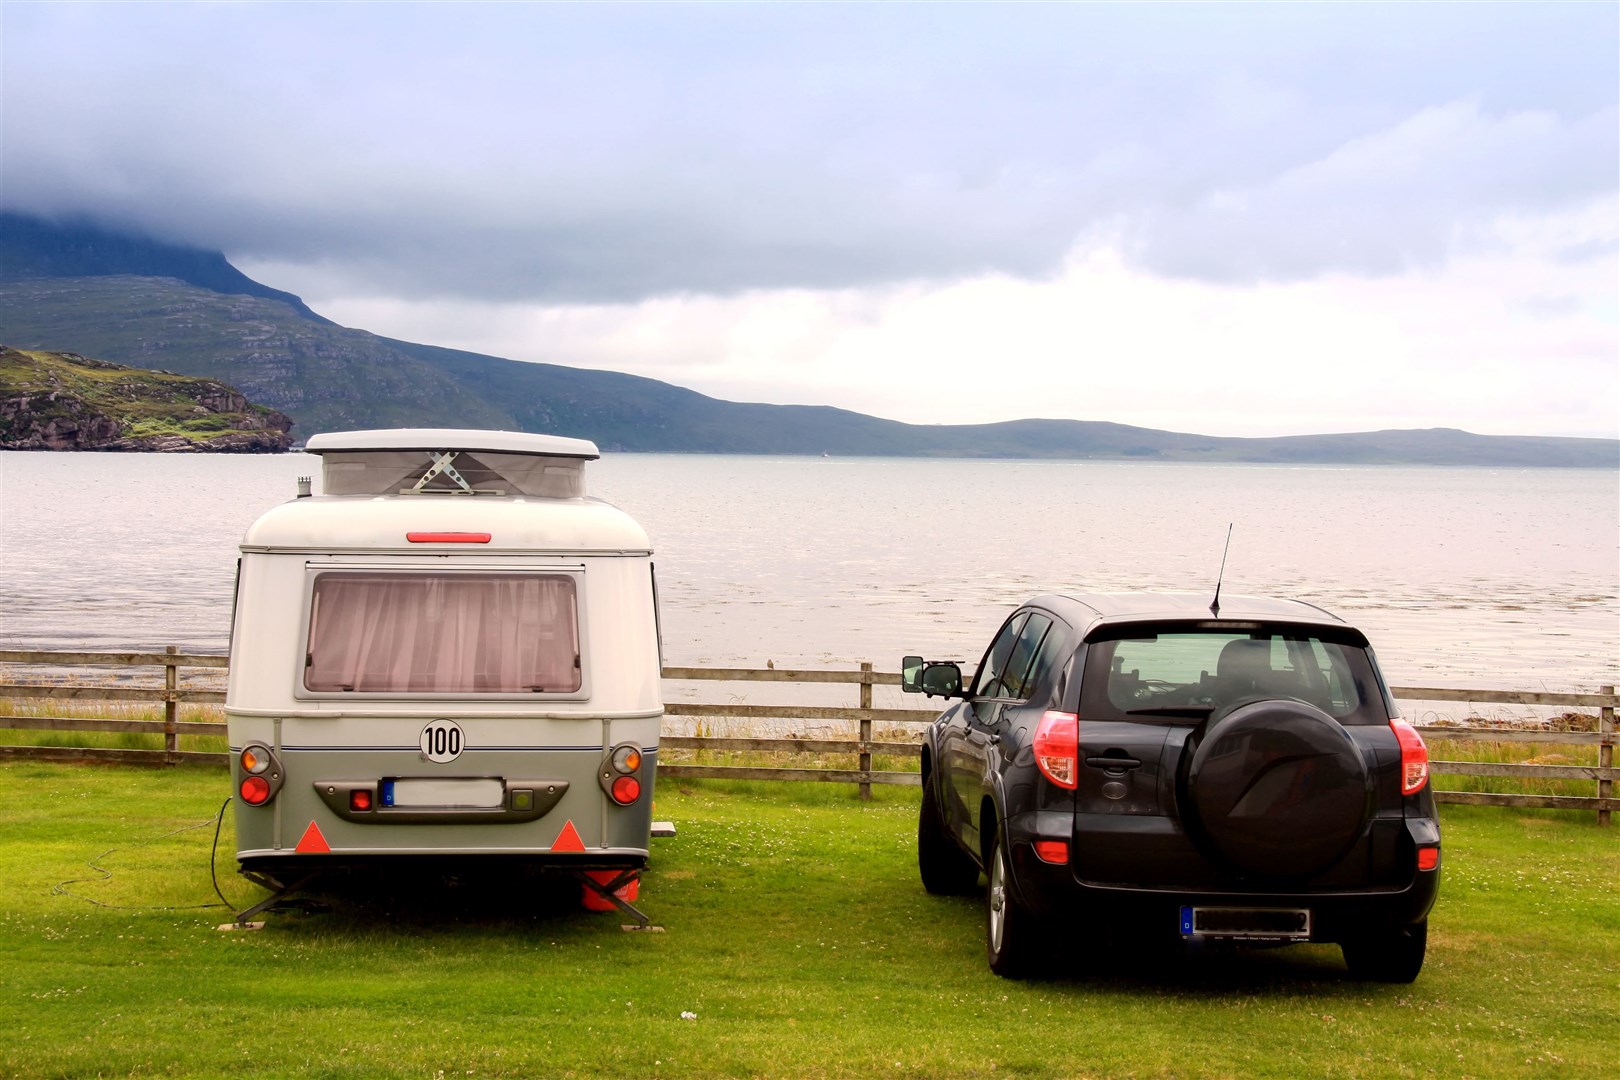 Holidaymaker numbers in the Highlands are expected to rise following the start of the school summer holidays.